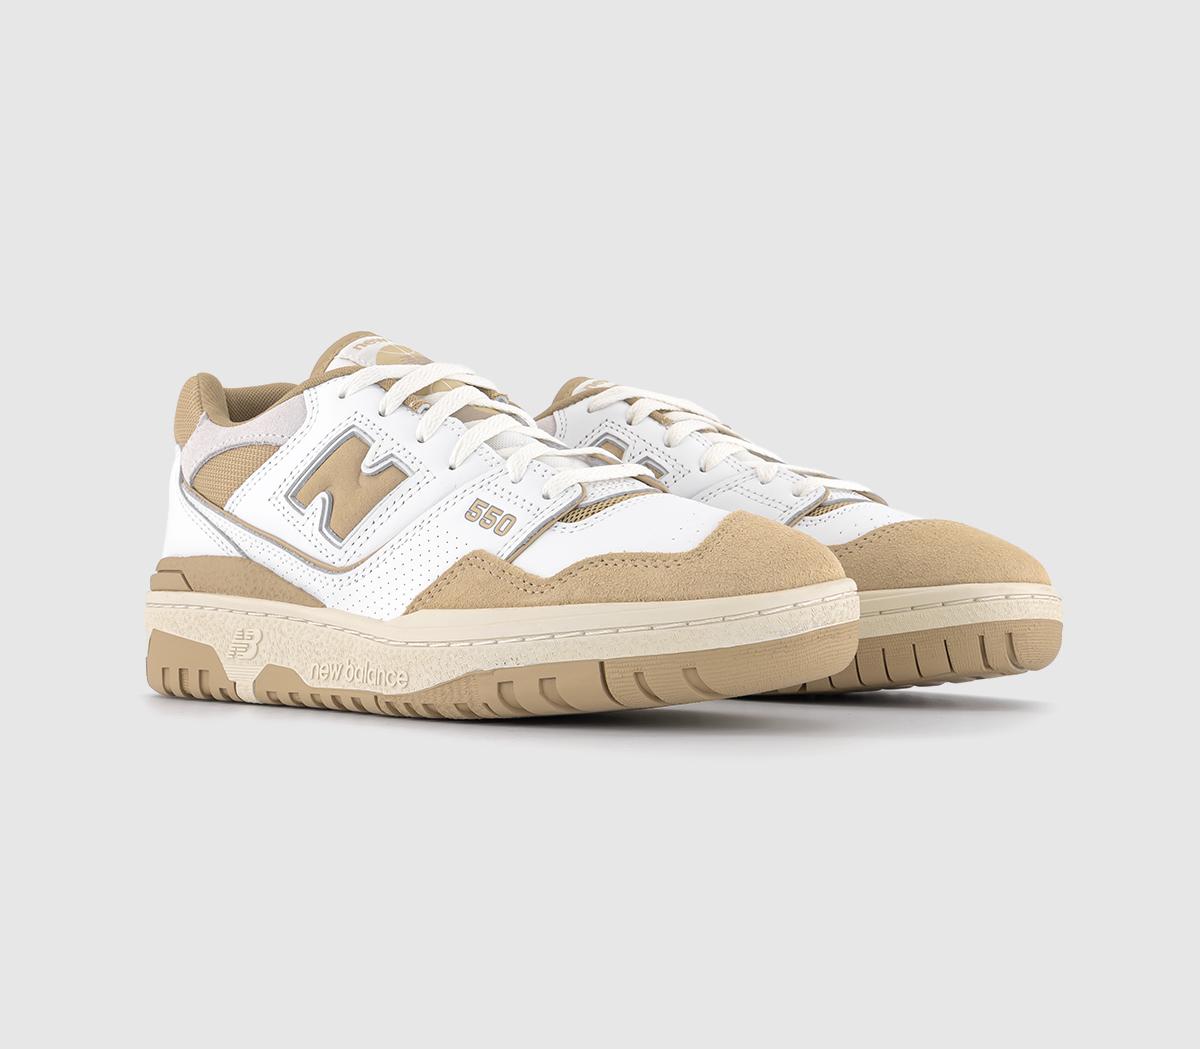 New Balance Bb550 Trainers White Sand Offwhite, 6